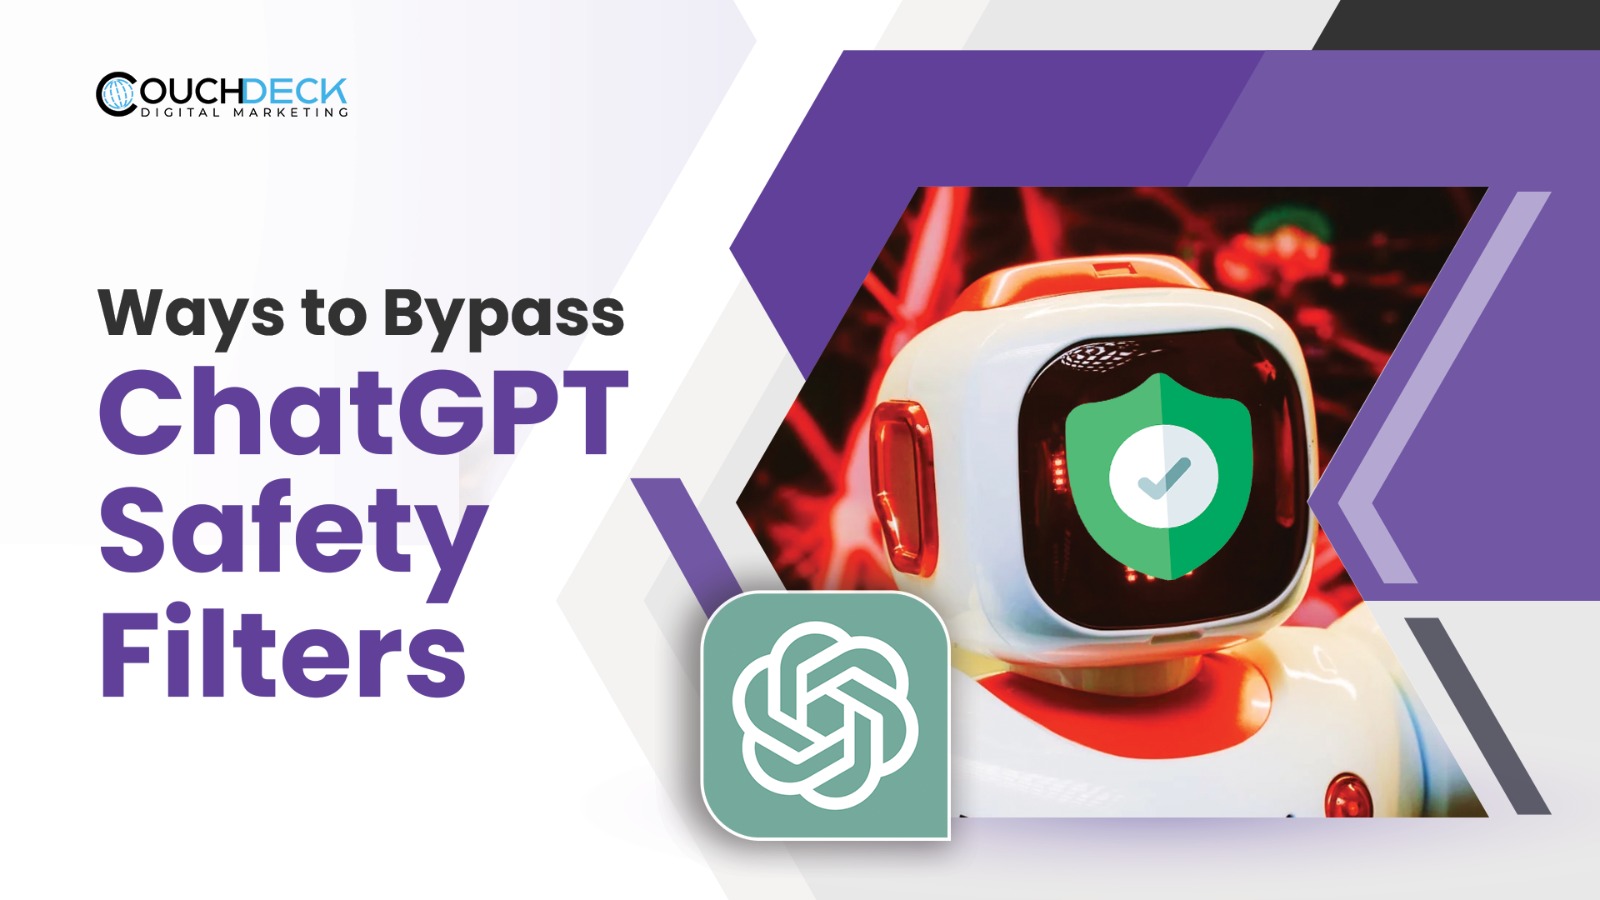 Ways to Bypass ChatGPT Safety Filters